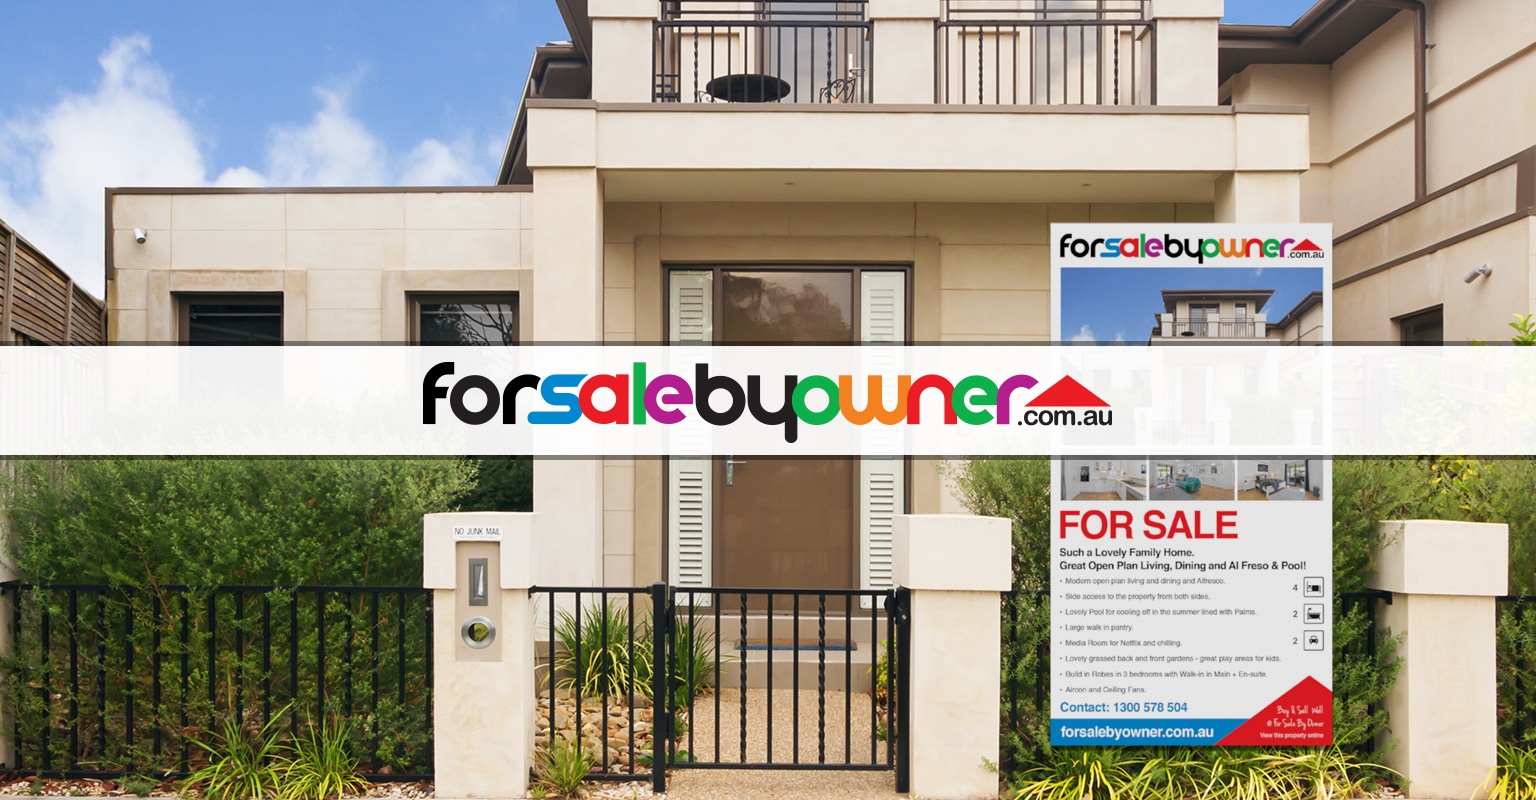 How to Advertise on Realestate.com.au